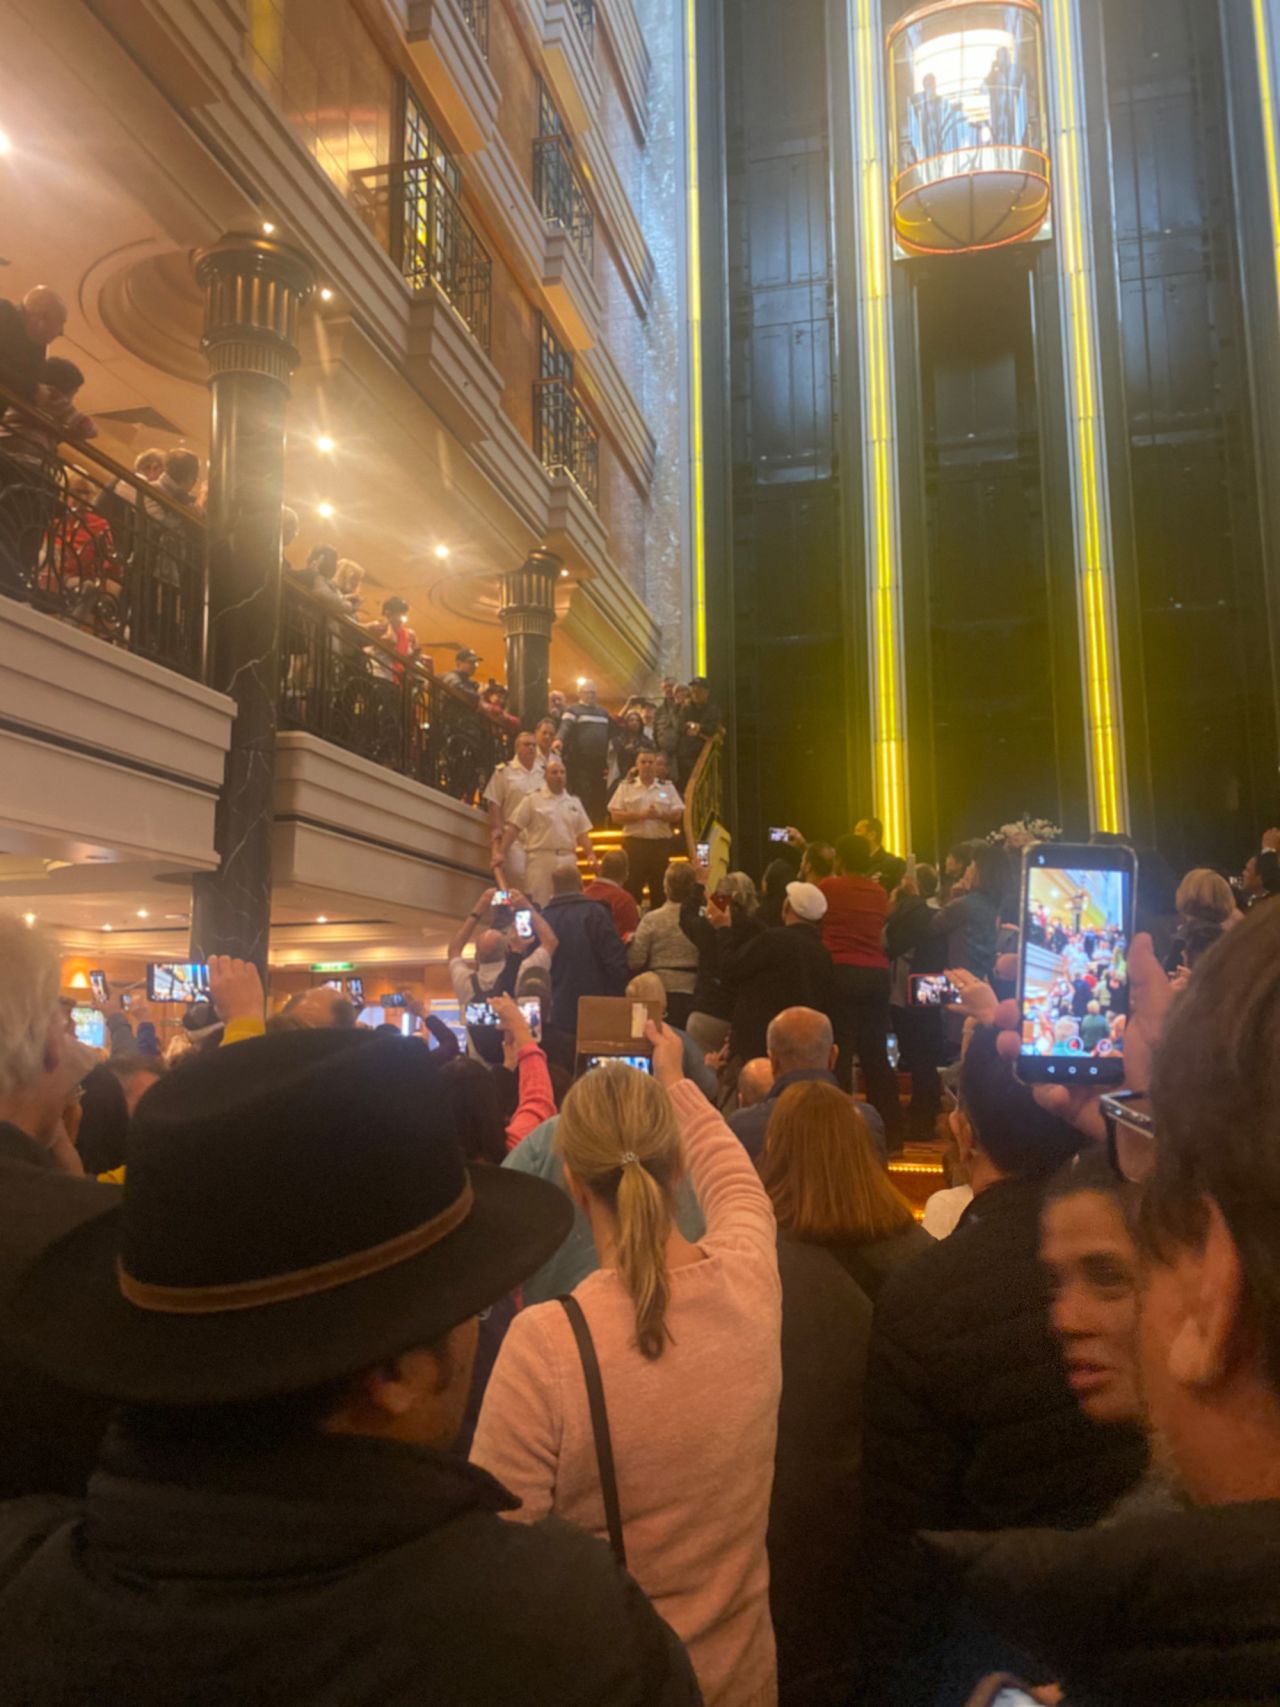 Passengers gathered in the atrium of Norwegian Spirit cruise ship on Monday to protest skipped ports of call.